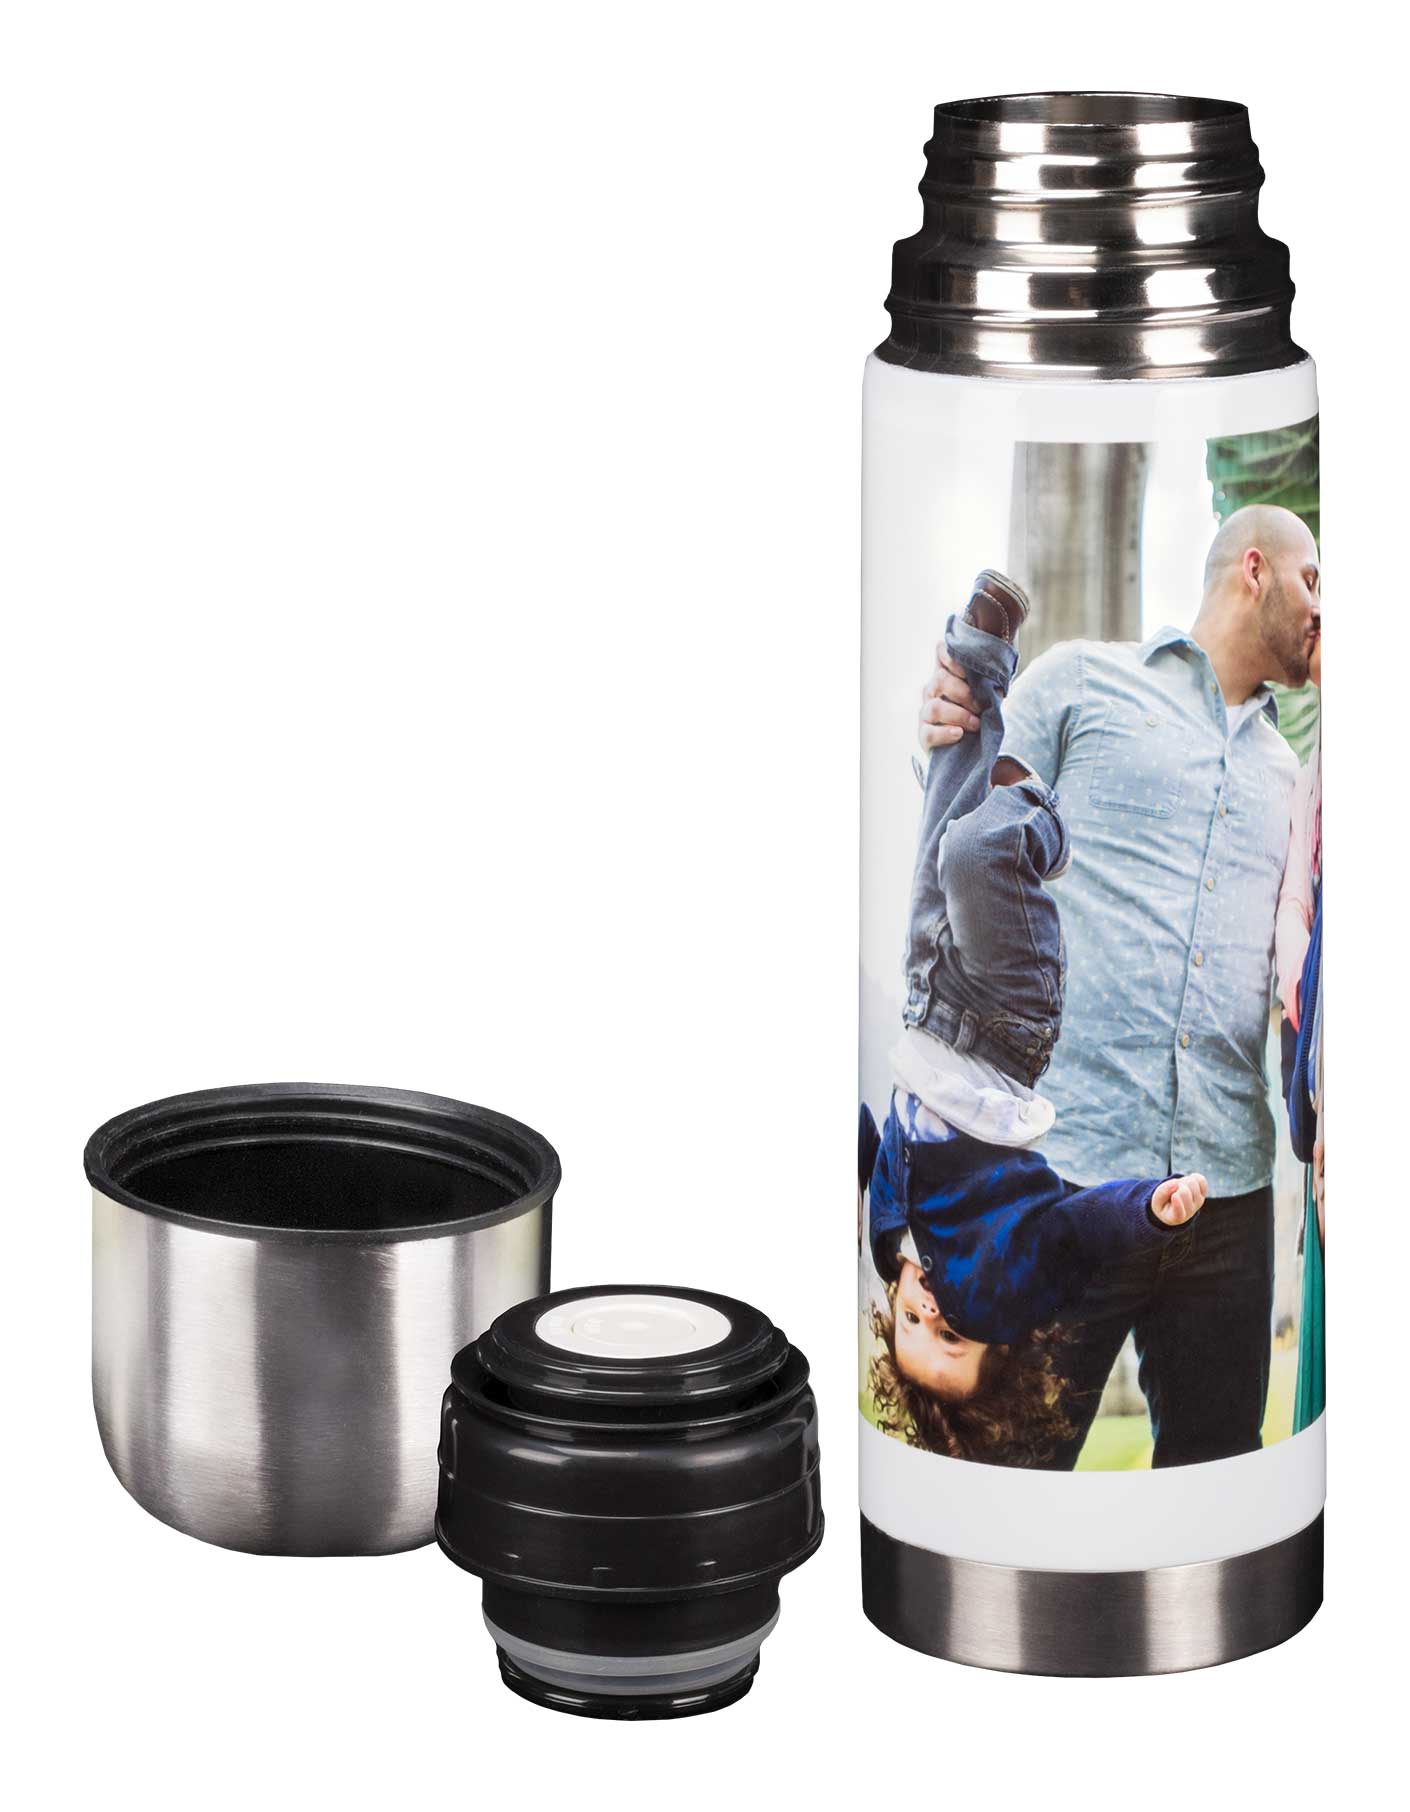 https://www.goodprints.com/wp-content/uploads/2019/09/personlaized-stainless-steel-thermos-with-photo-printy.jpg